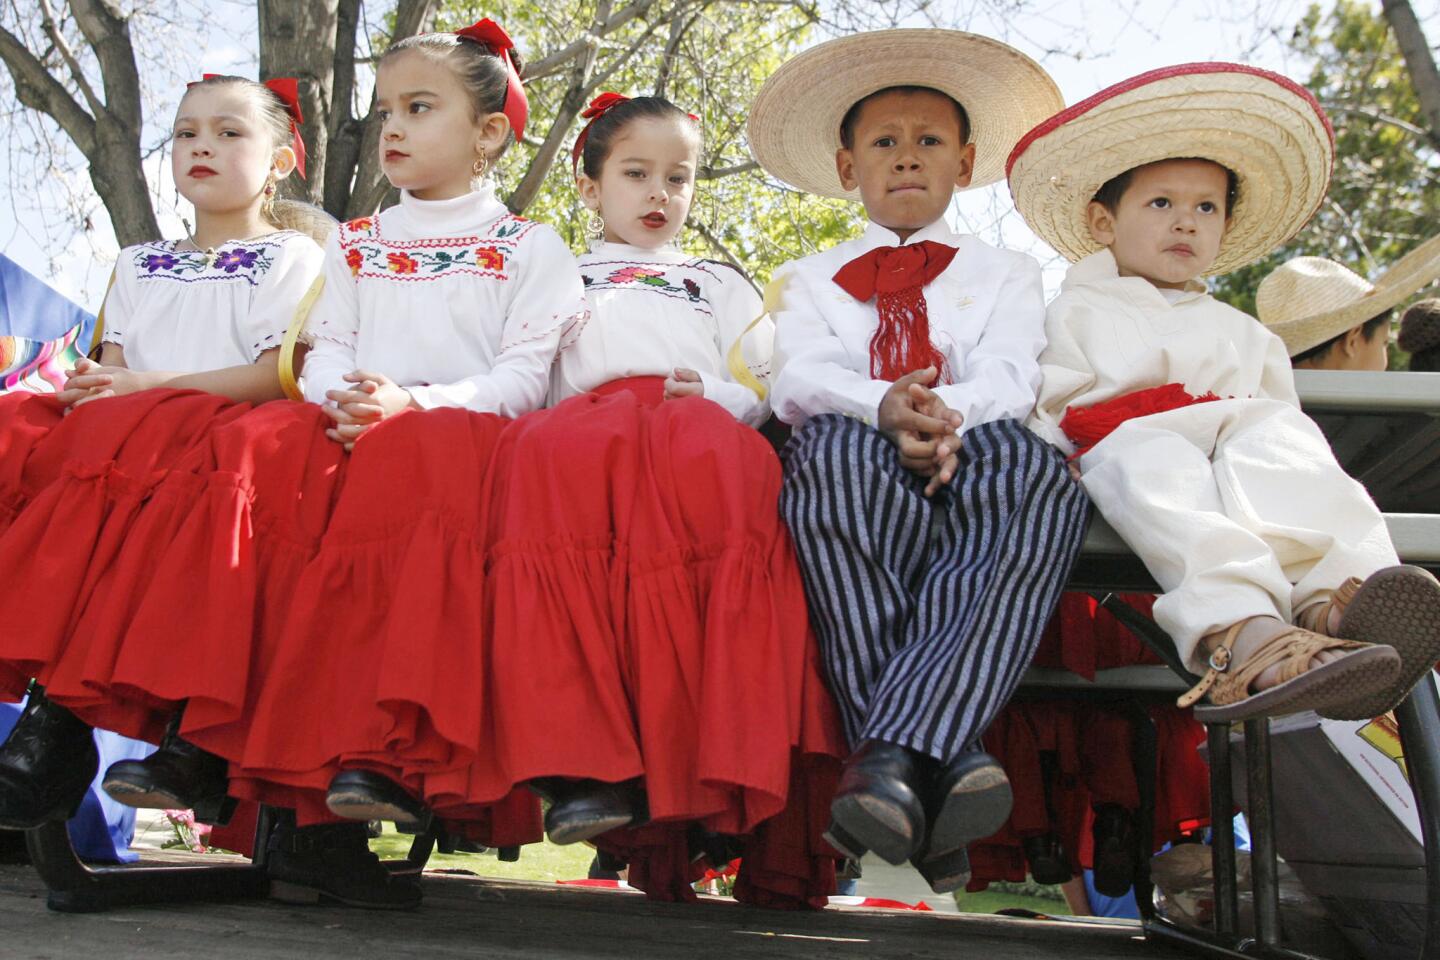 Nicoleta Burkhardt, 5, from left, Cristina Olman, 5, Cristina's twin, Juliana, Adan Villafuertee, 7, and Adan's brother, Santiago, 3, wait before marching at Burbank on Parade, which took place on Olive Ave. between Keystone St. and Lomita St. on Saturday, April 14, 2012.